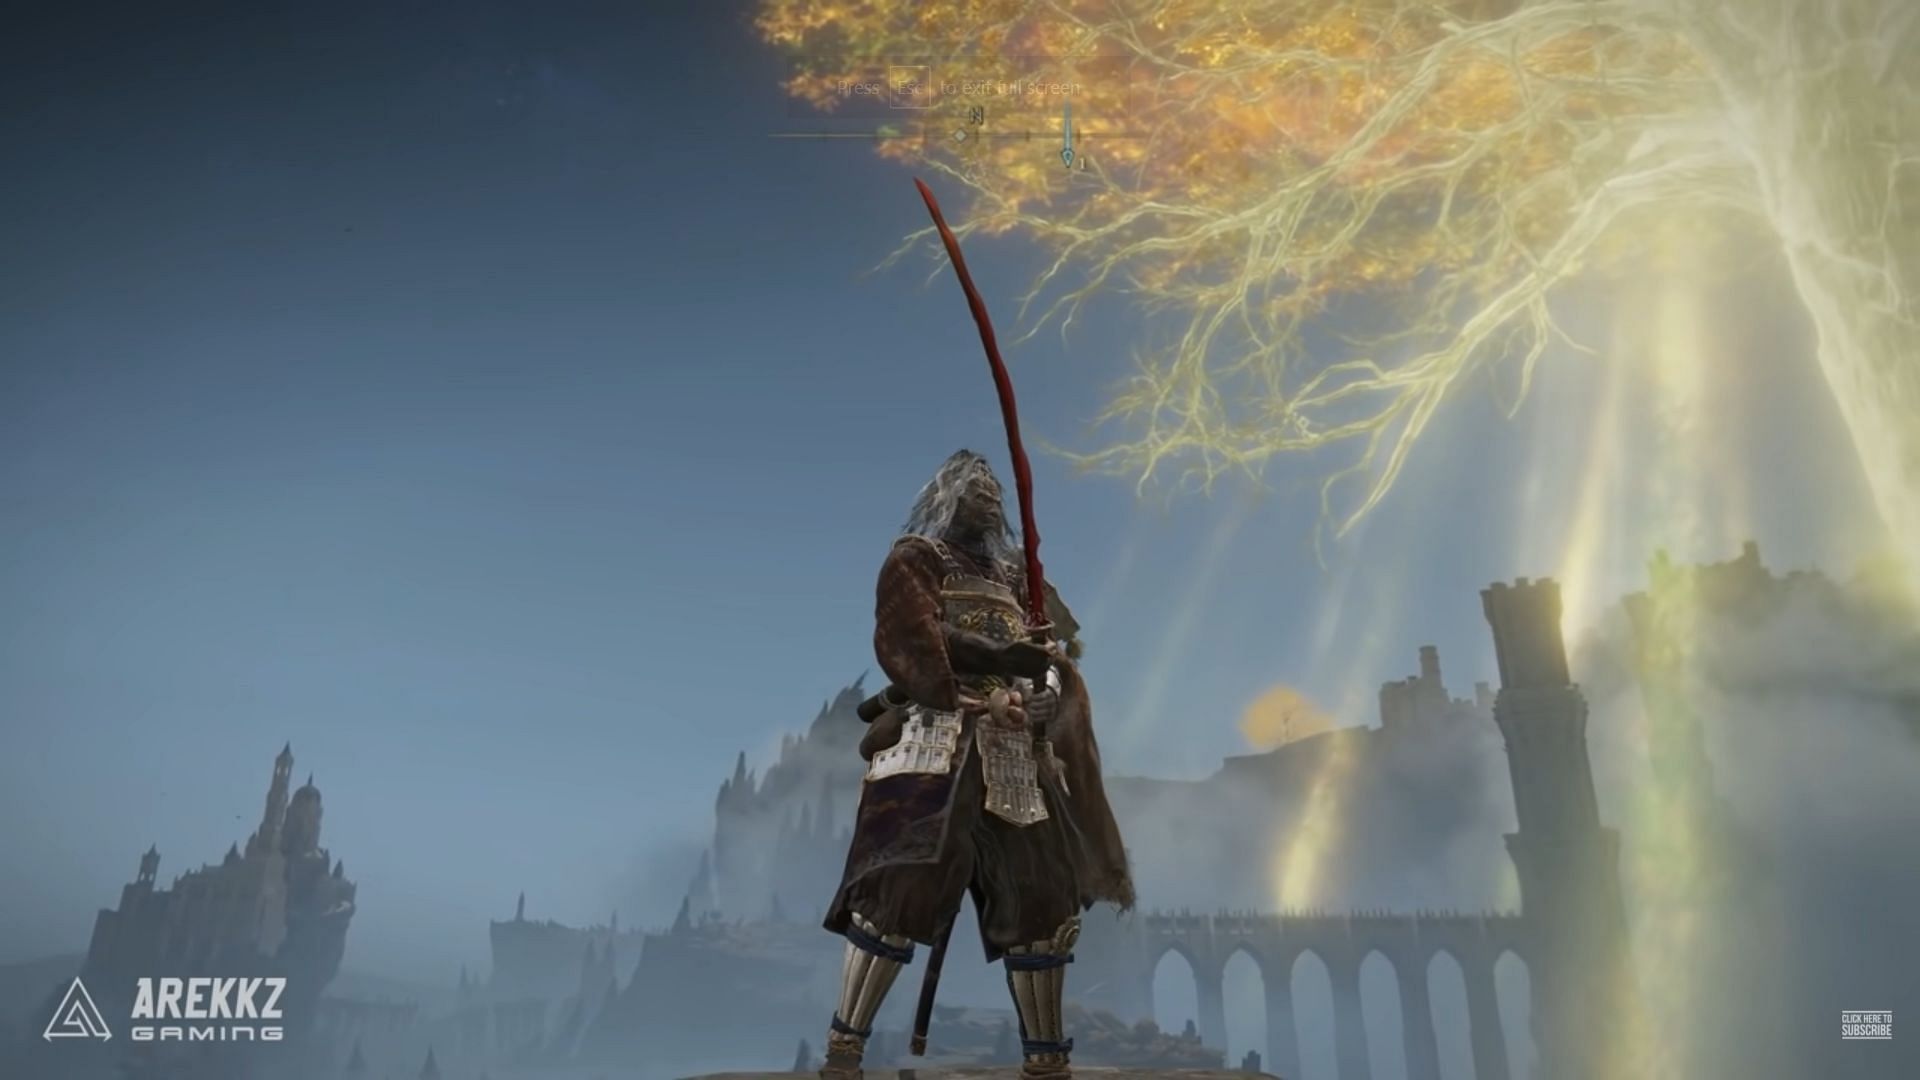 Rivers of Blood is currently the strongest PVP weapon in Elden Ring (Image via Arekkz Gaming/Youtube)